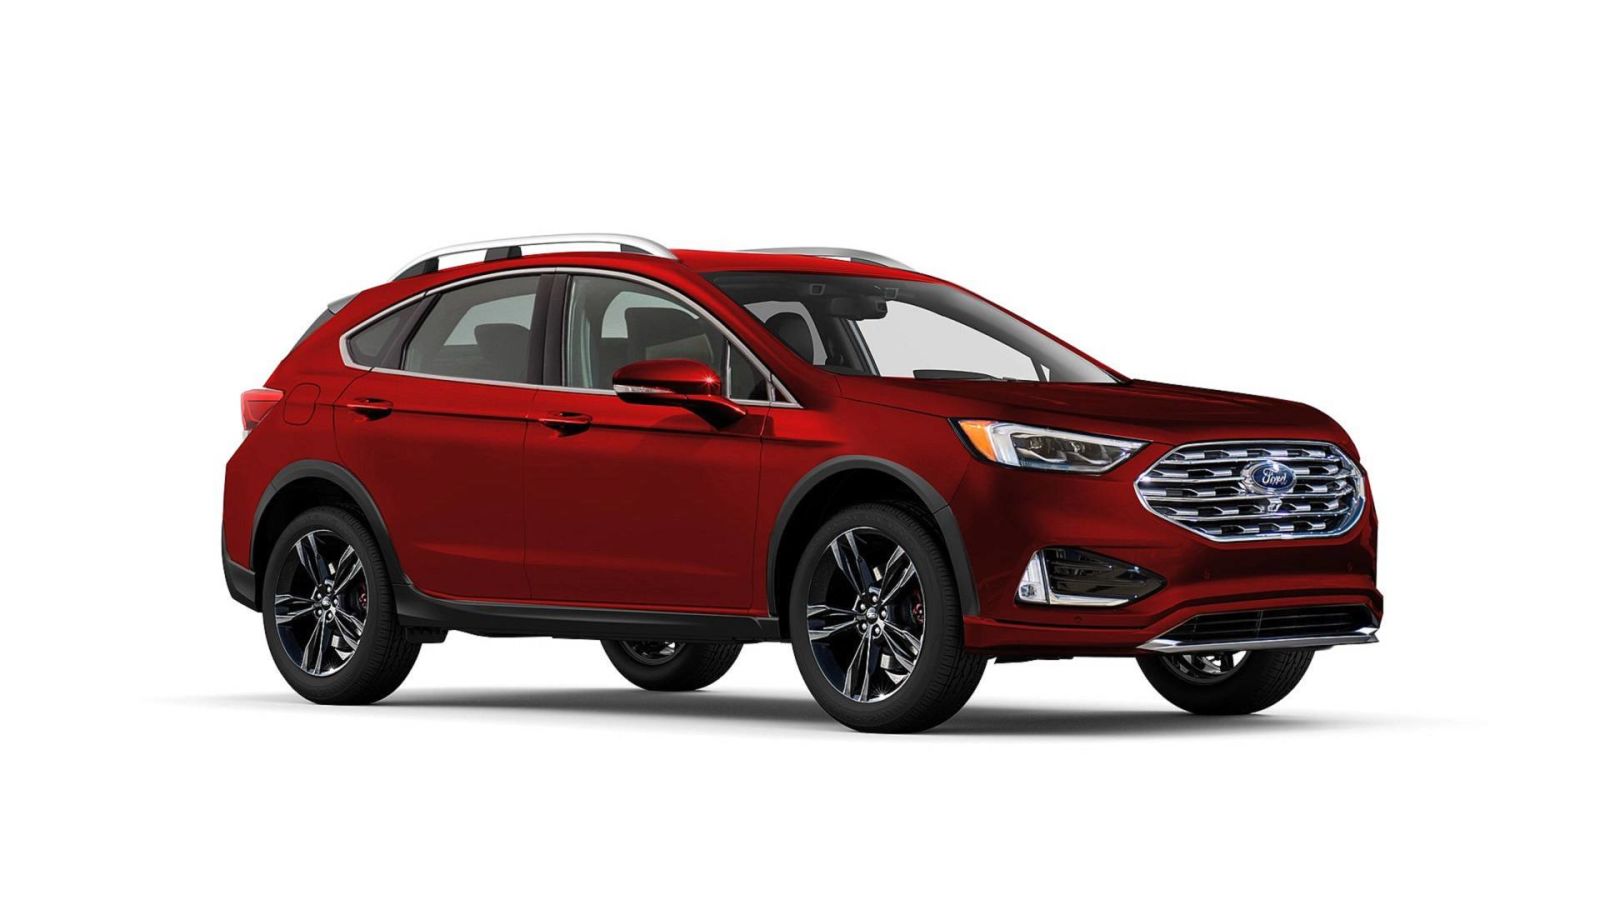 Illustration for article titled Based on Fords announcement, someone Outbackified the Fusion